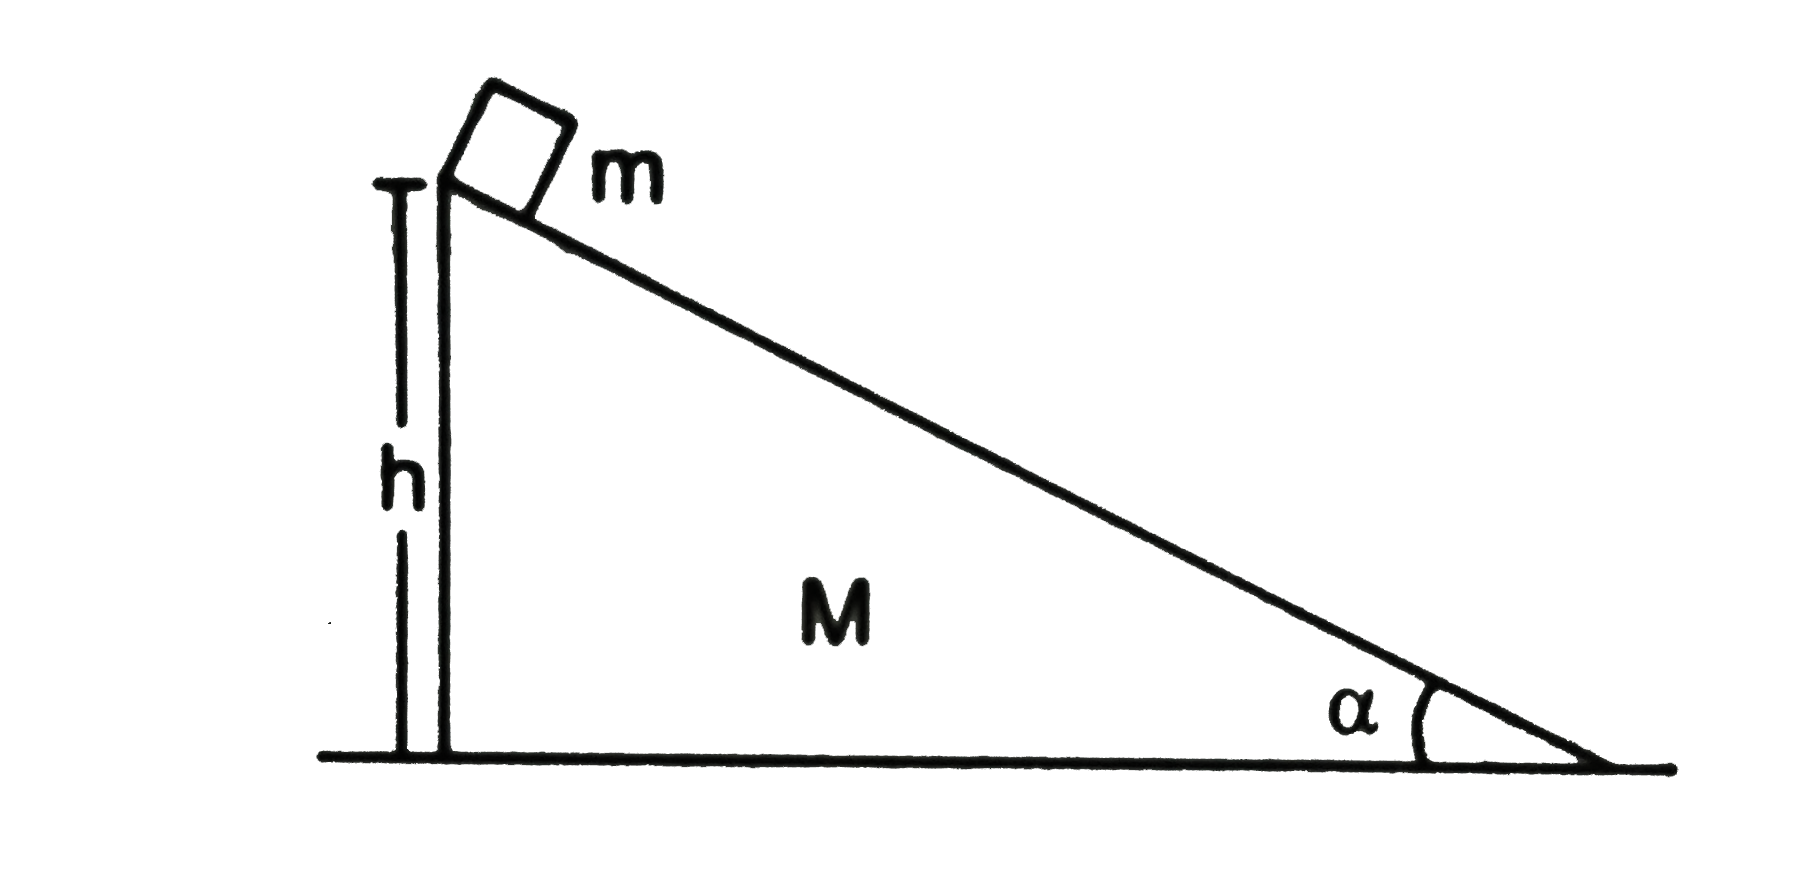 A block of mas m is placed on a triangular block of mas m, which in tunis placed on a horizontal surface as shown in figure. Assuming frictionless  surfaces find the velocity of the triangular block when the smaller block reaches the bottom end.